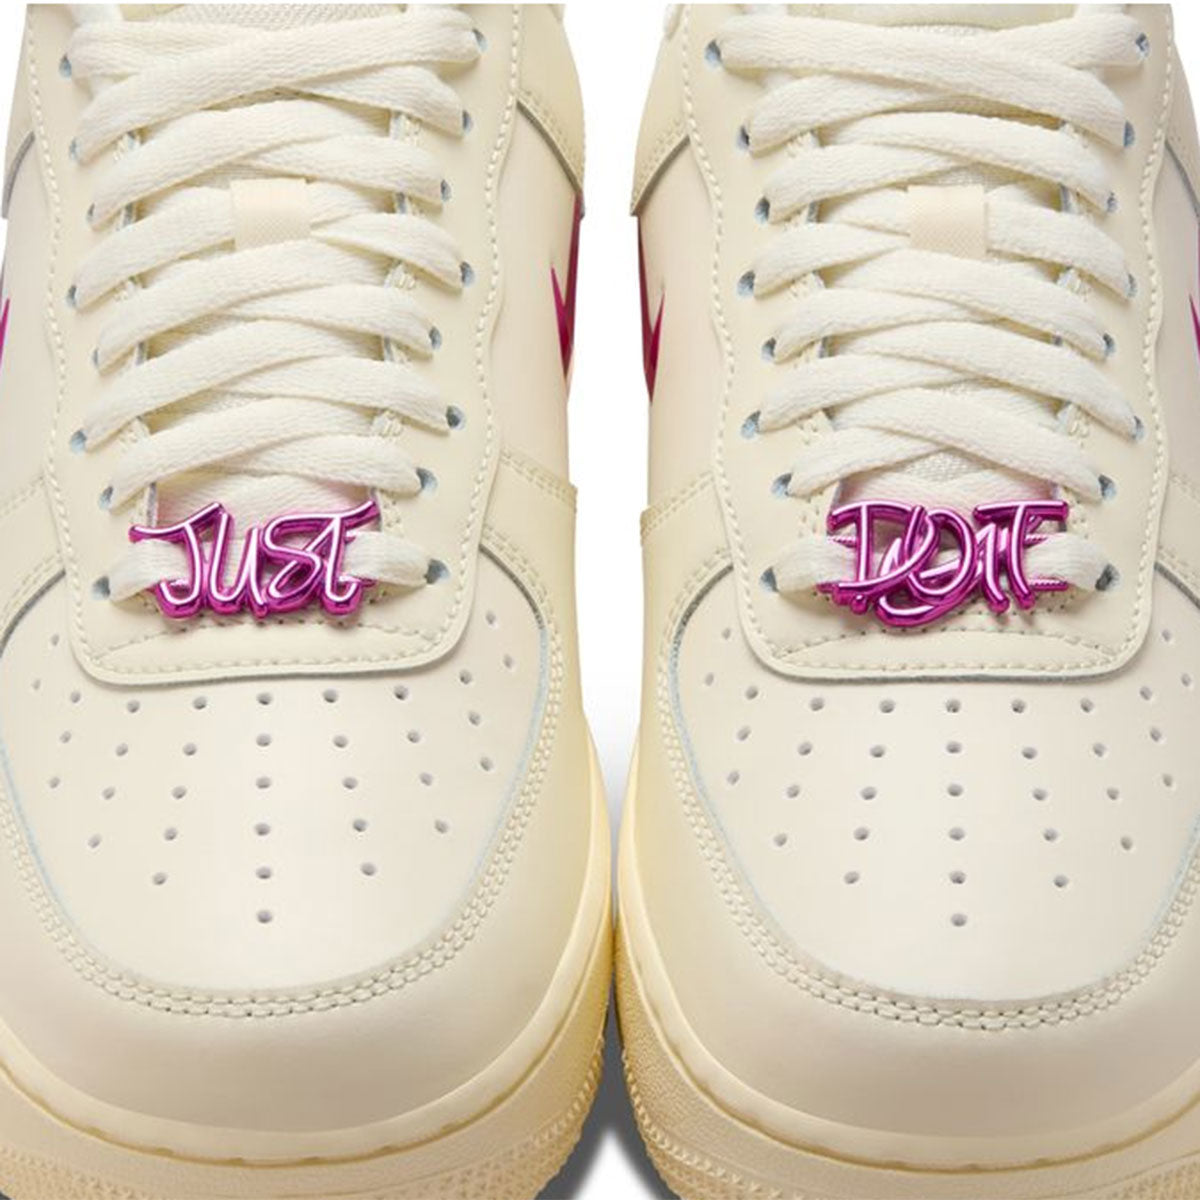 NIKE WMNS AIR FORCE 1 '07 SE Just Do It 耐吉女款 Air Force 1 '07 SE Just Do It [FB8251-101]